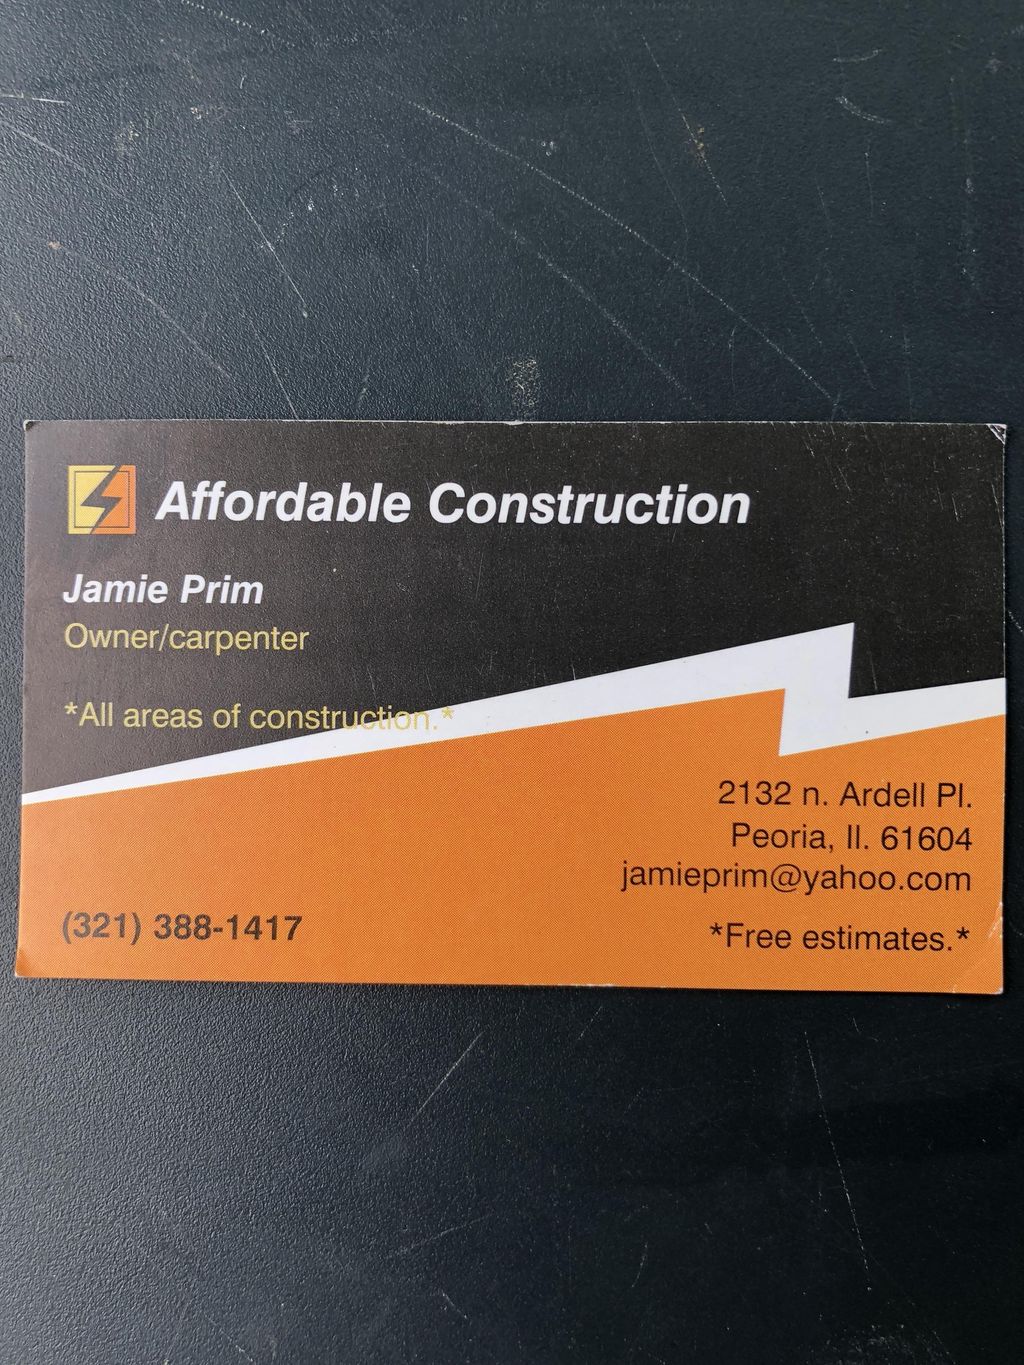 Affordable Constructuon Services